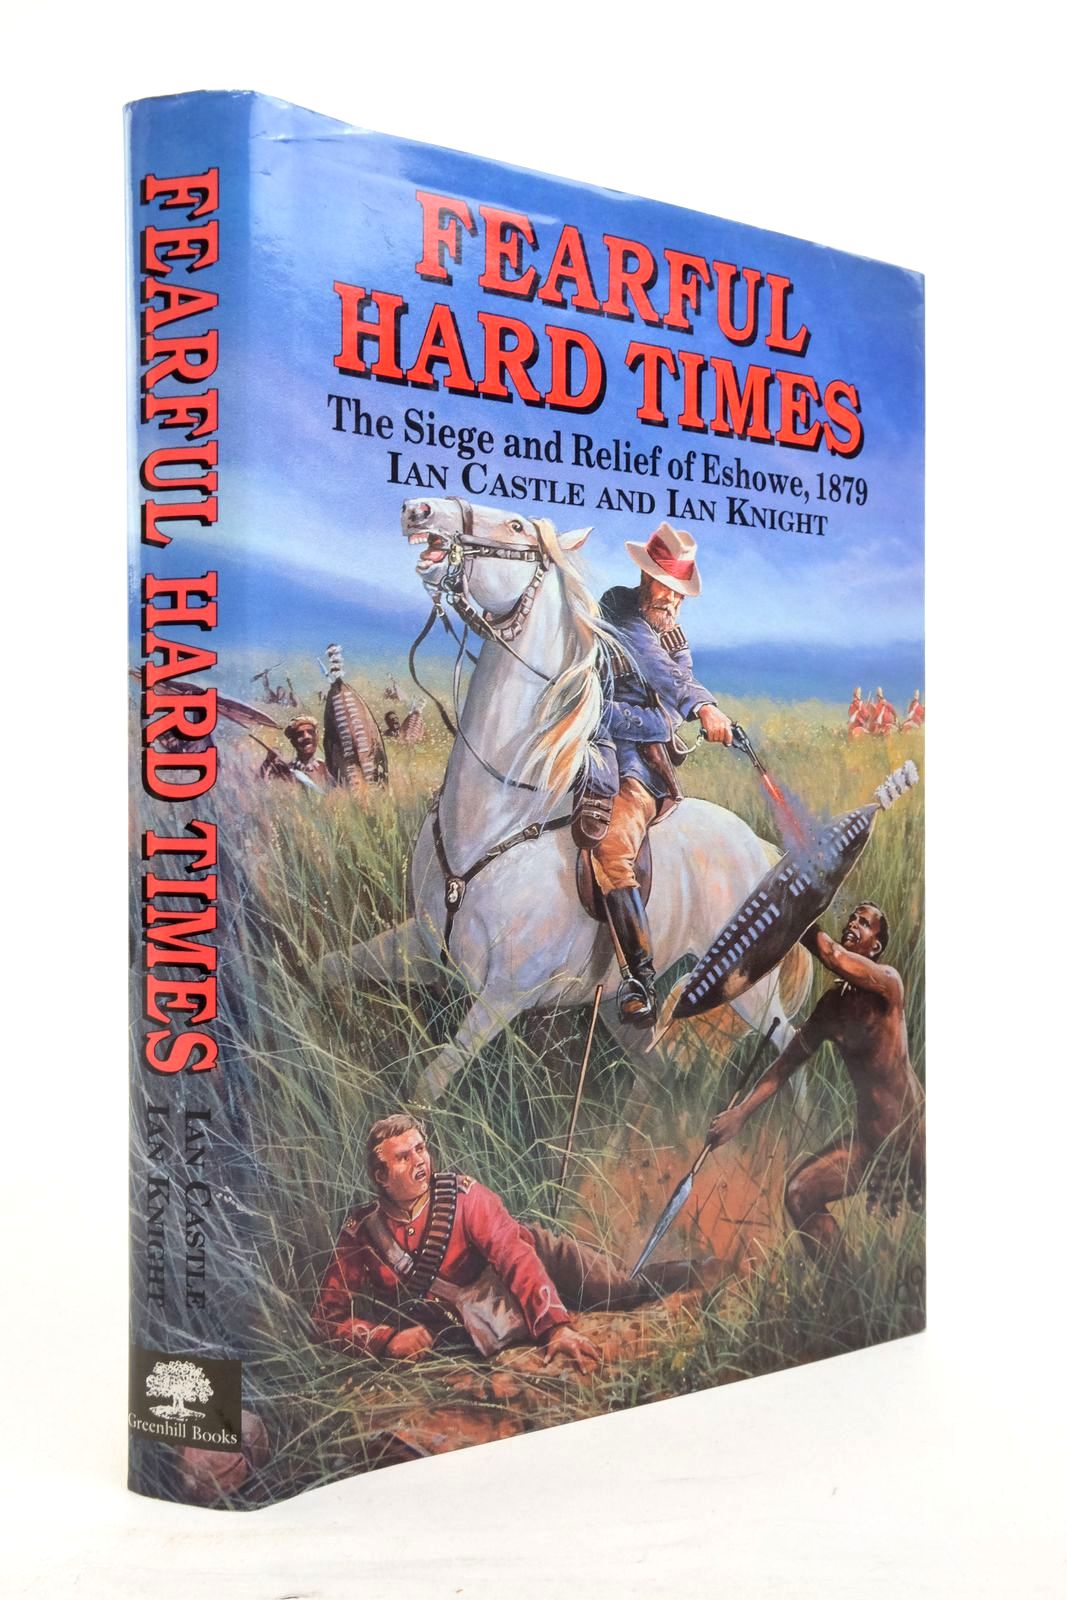 Photo of FEARFUL HARD TIMES THE SIEGE AND RELIEF OF ESHOWE 1879 written by Castle, Ian Knight, Ian published by Greenhill Books (STOCK CODE: 2138381)  for sale by Stella & Rose's Books